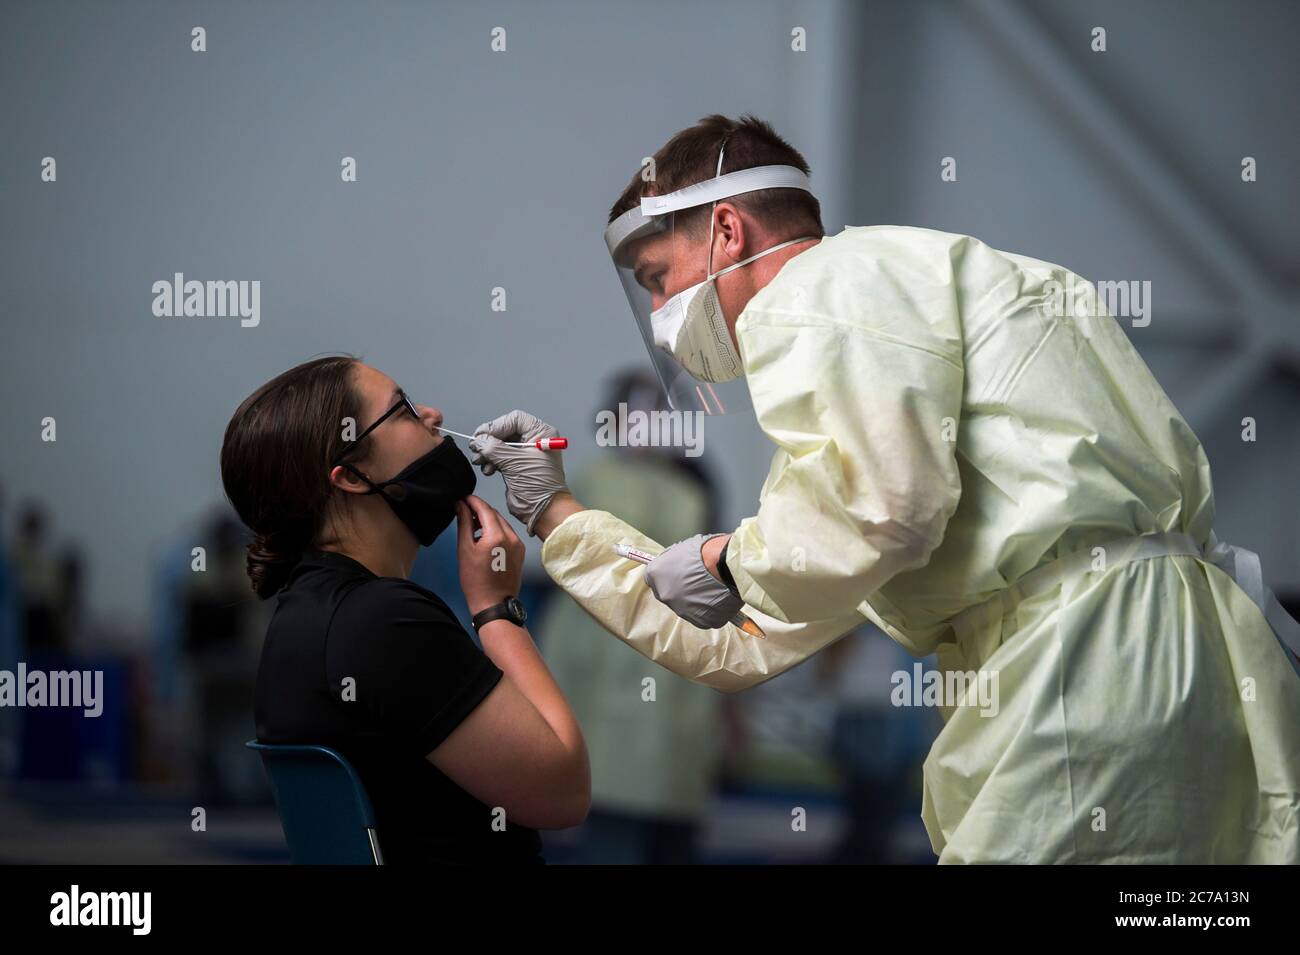 A U.S. Air Force medic takes a nasal swab from an academy cadet on arrival, as they become the first cadet class under the COVID-19 pandemic at the Air Force Academy June 25, 2020 in Colorado Springs, Colorado. Stock Photo